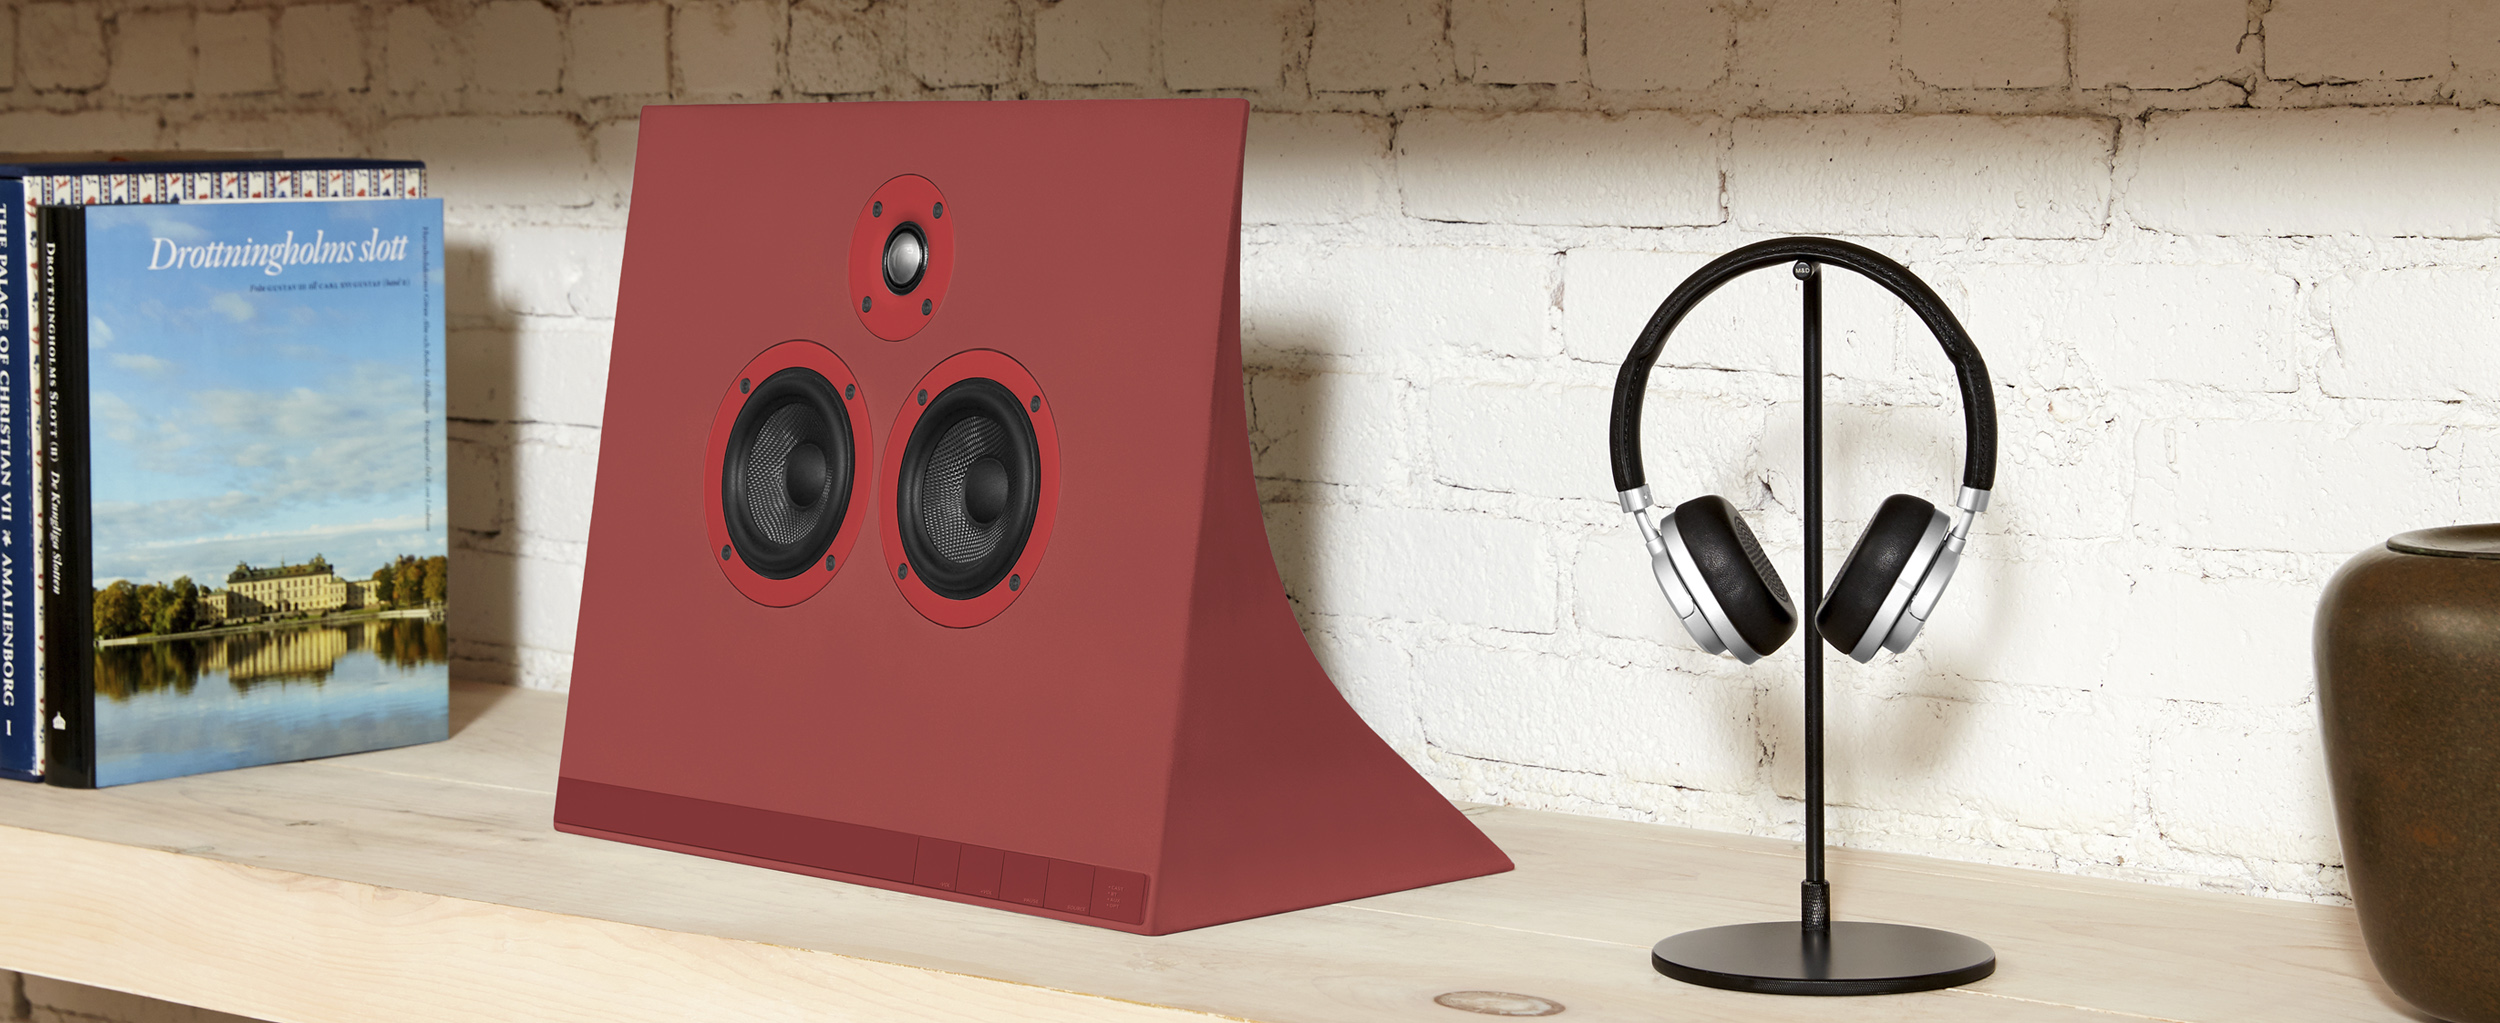 Introducing The Limited-Edition MA770 Wireless Speaker Exclusively For Product (RED)